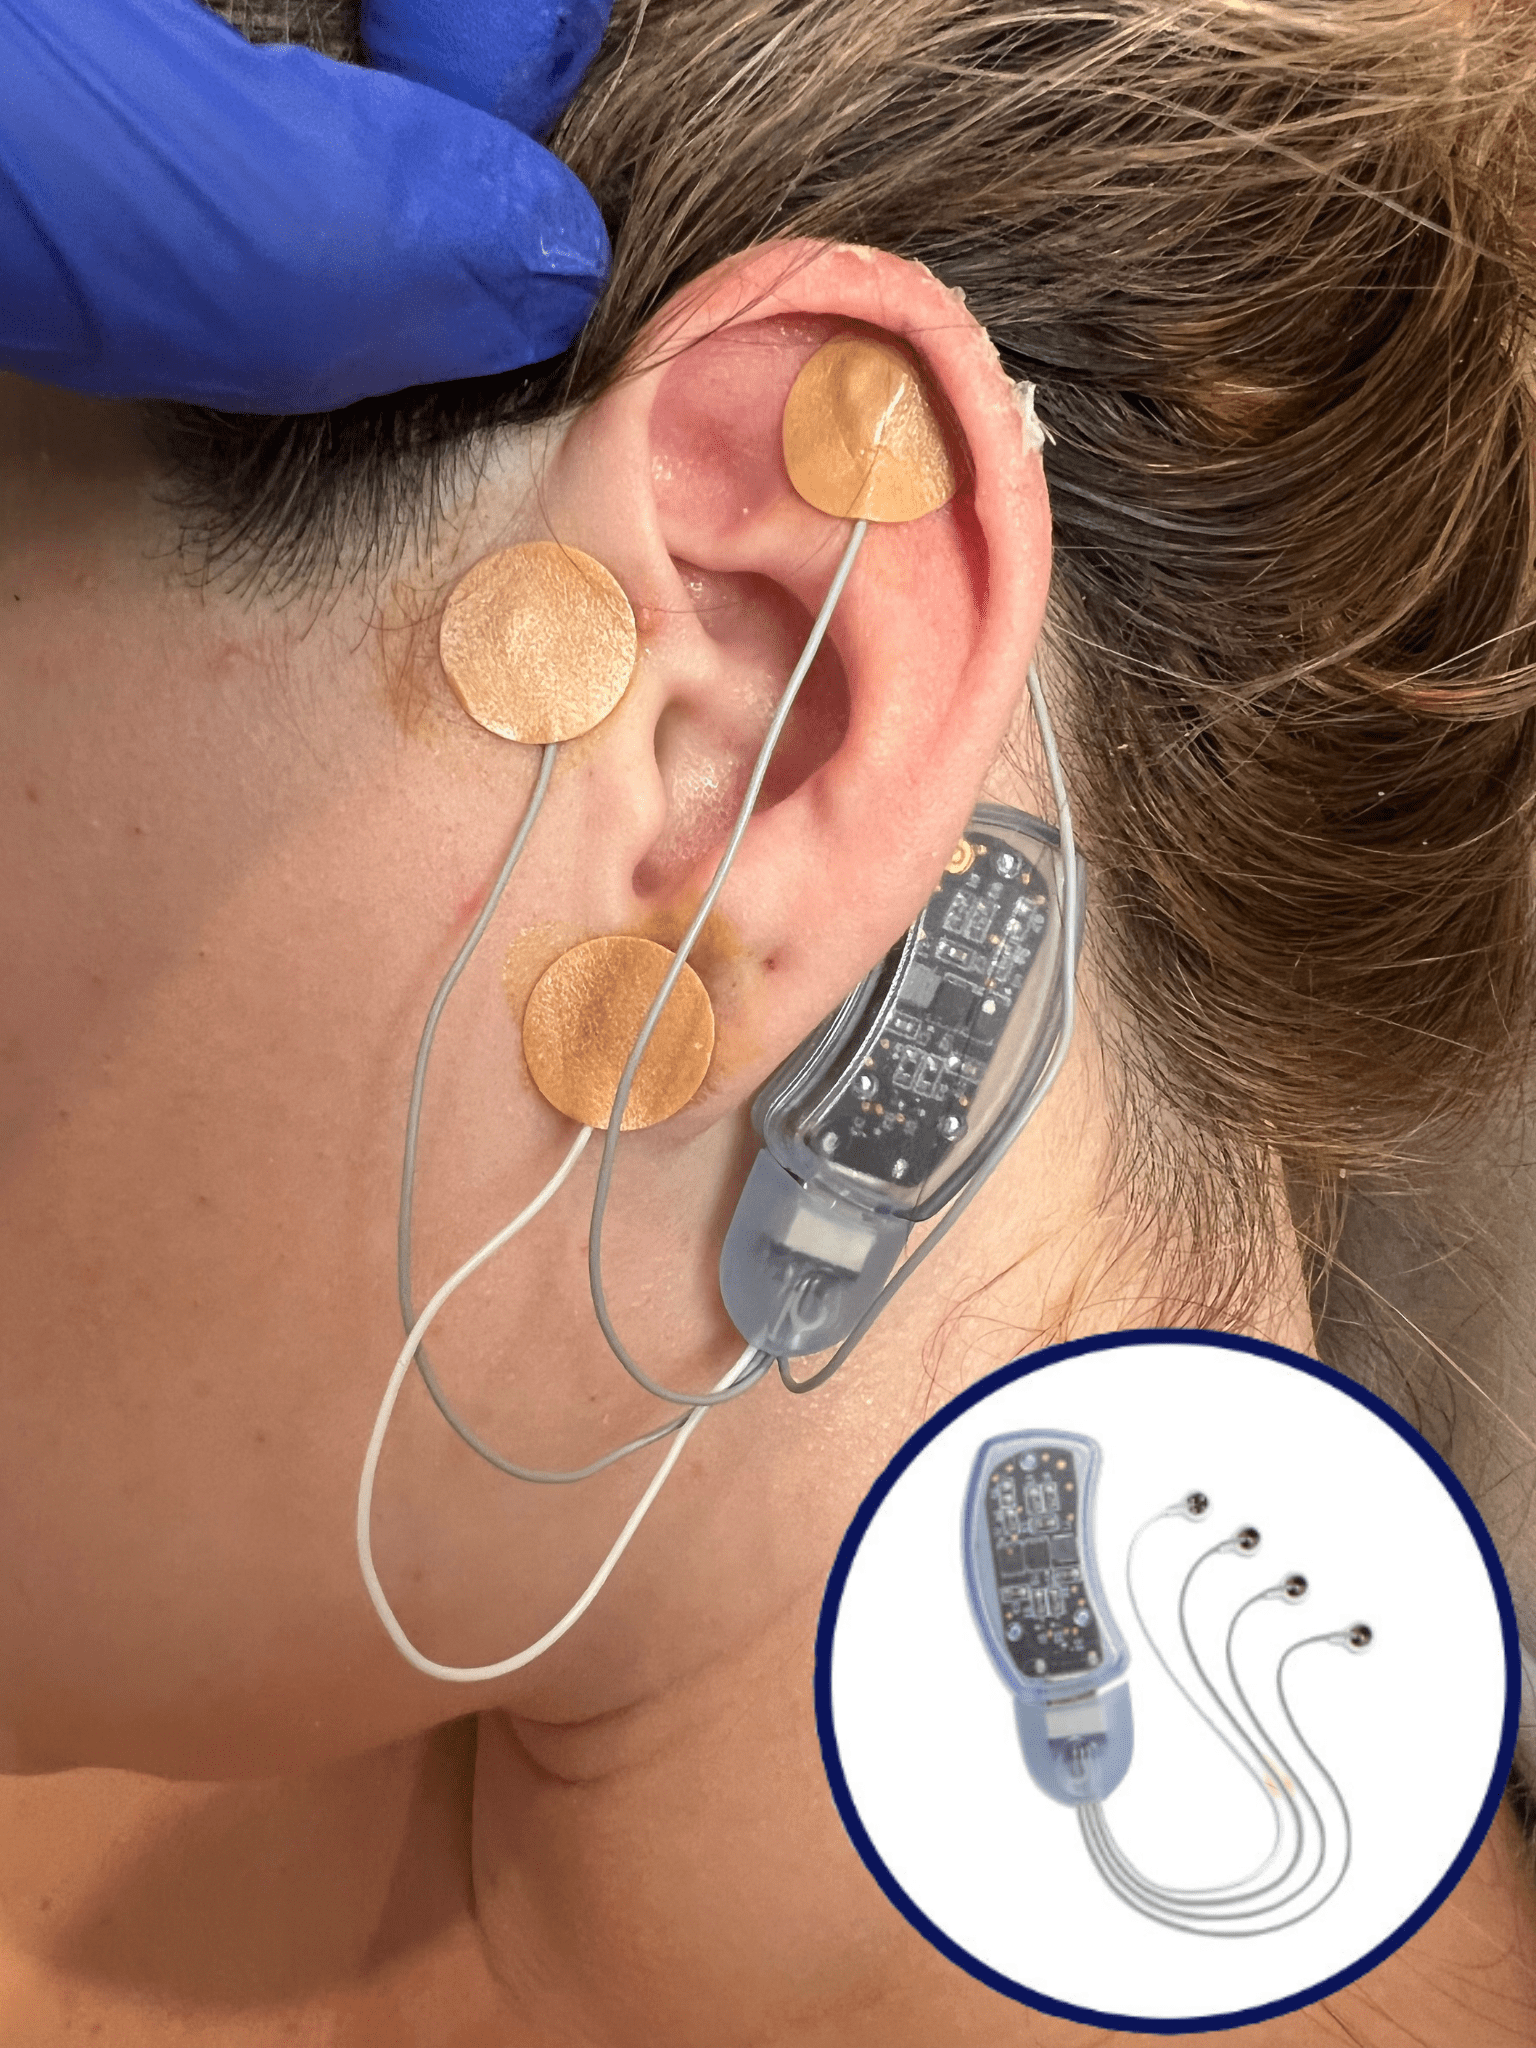 The BRIDGE Device fits behind the ear and sends gentle electrical impulses directly into the brain, blocking pain signals